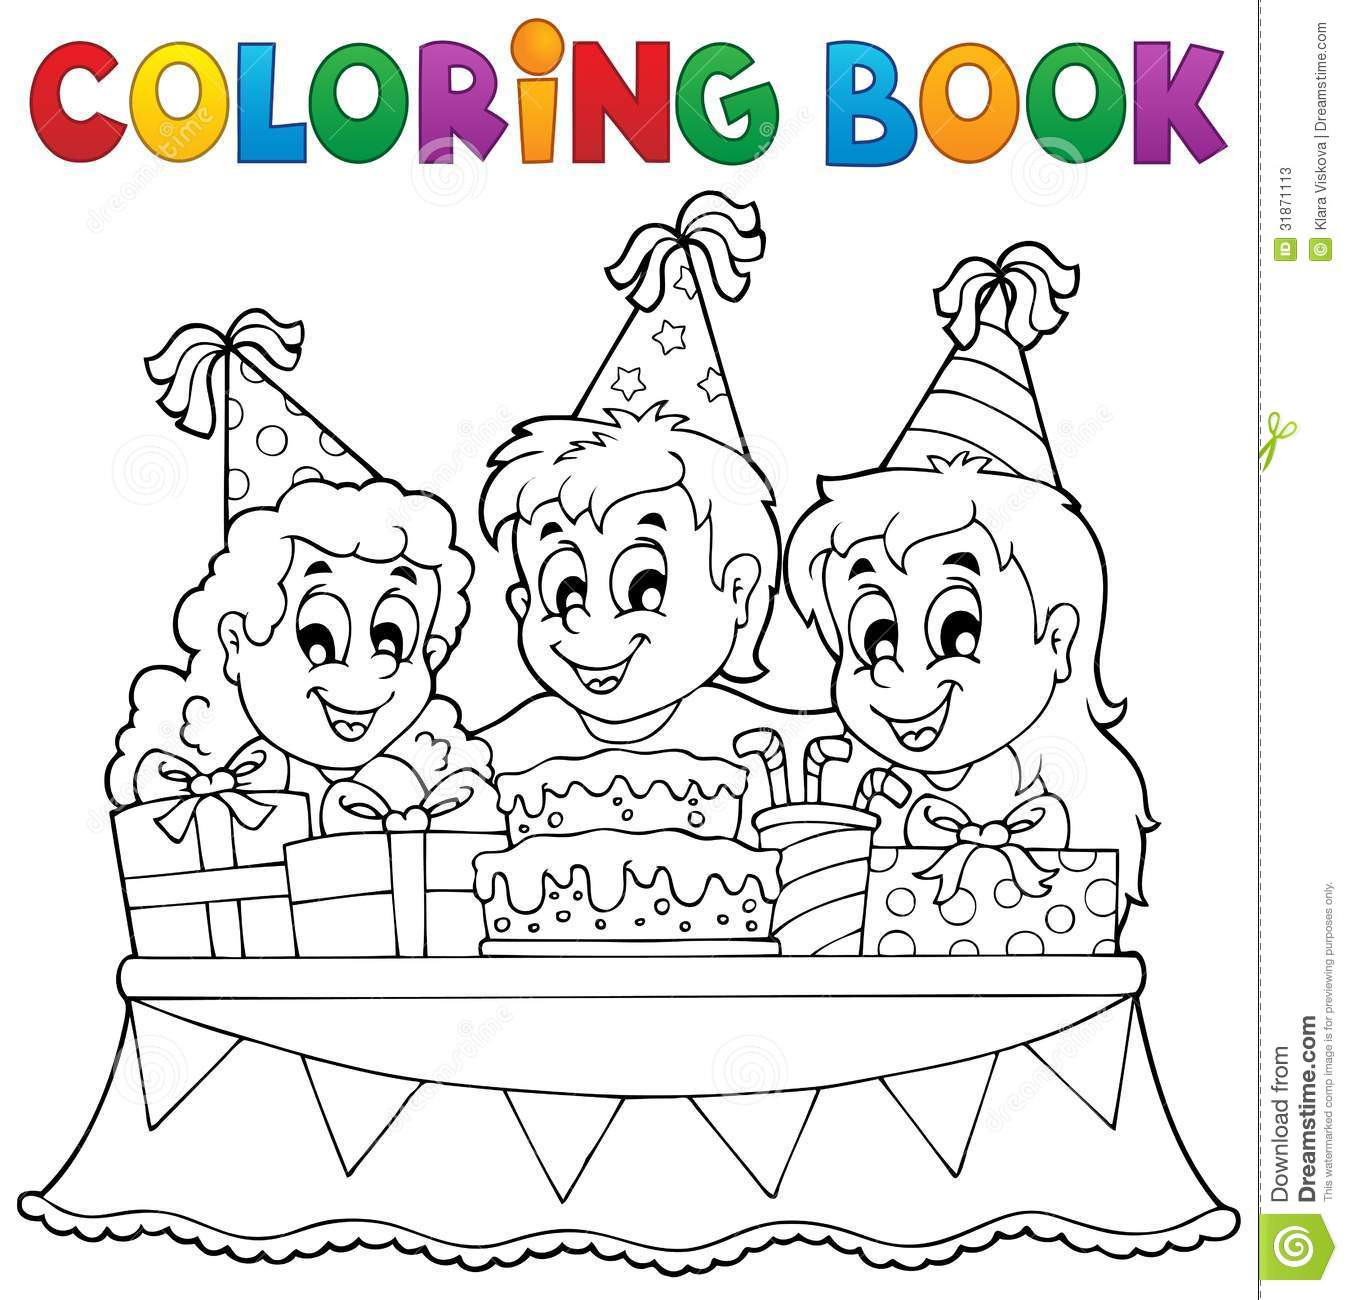 Coloring Book Kids
 Coloring Book Kids Party Theme 1 Stock s Image